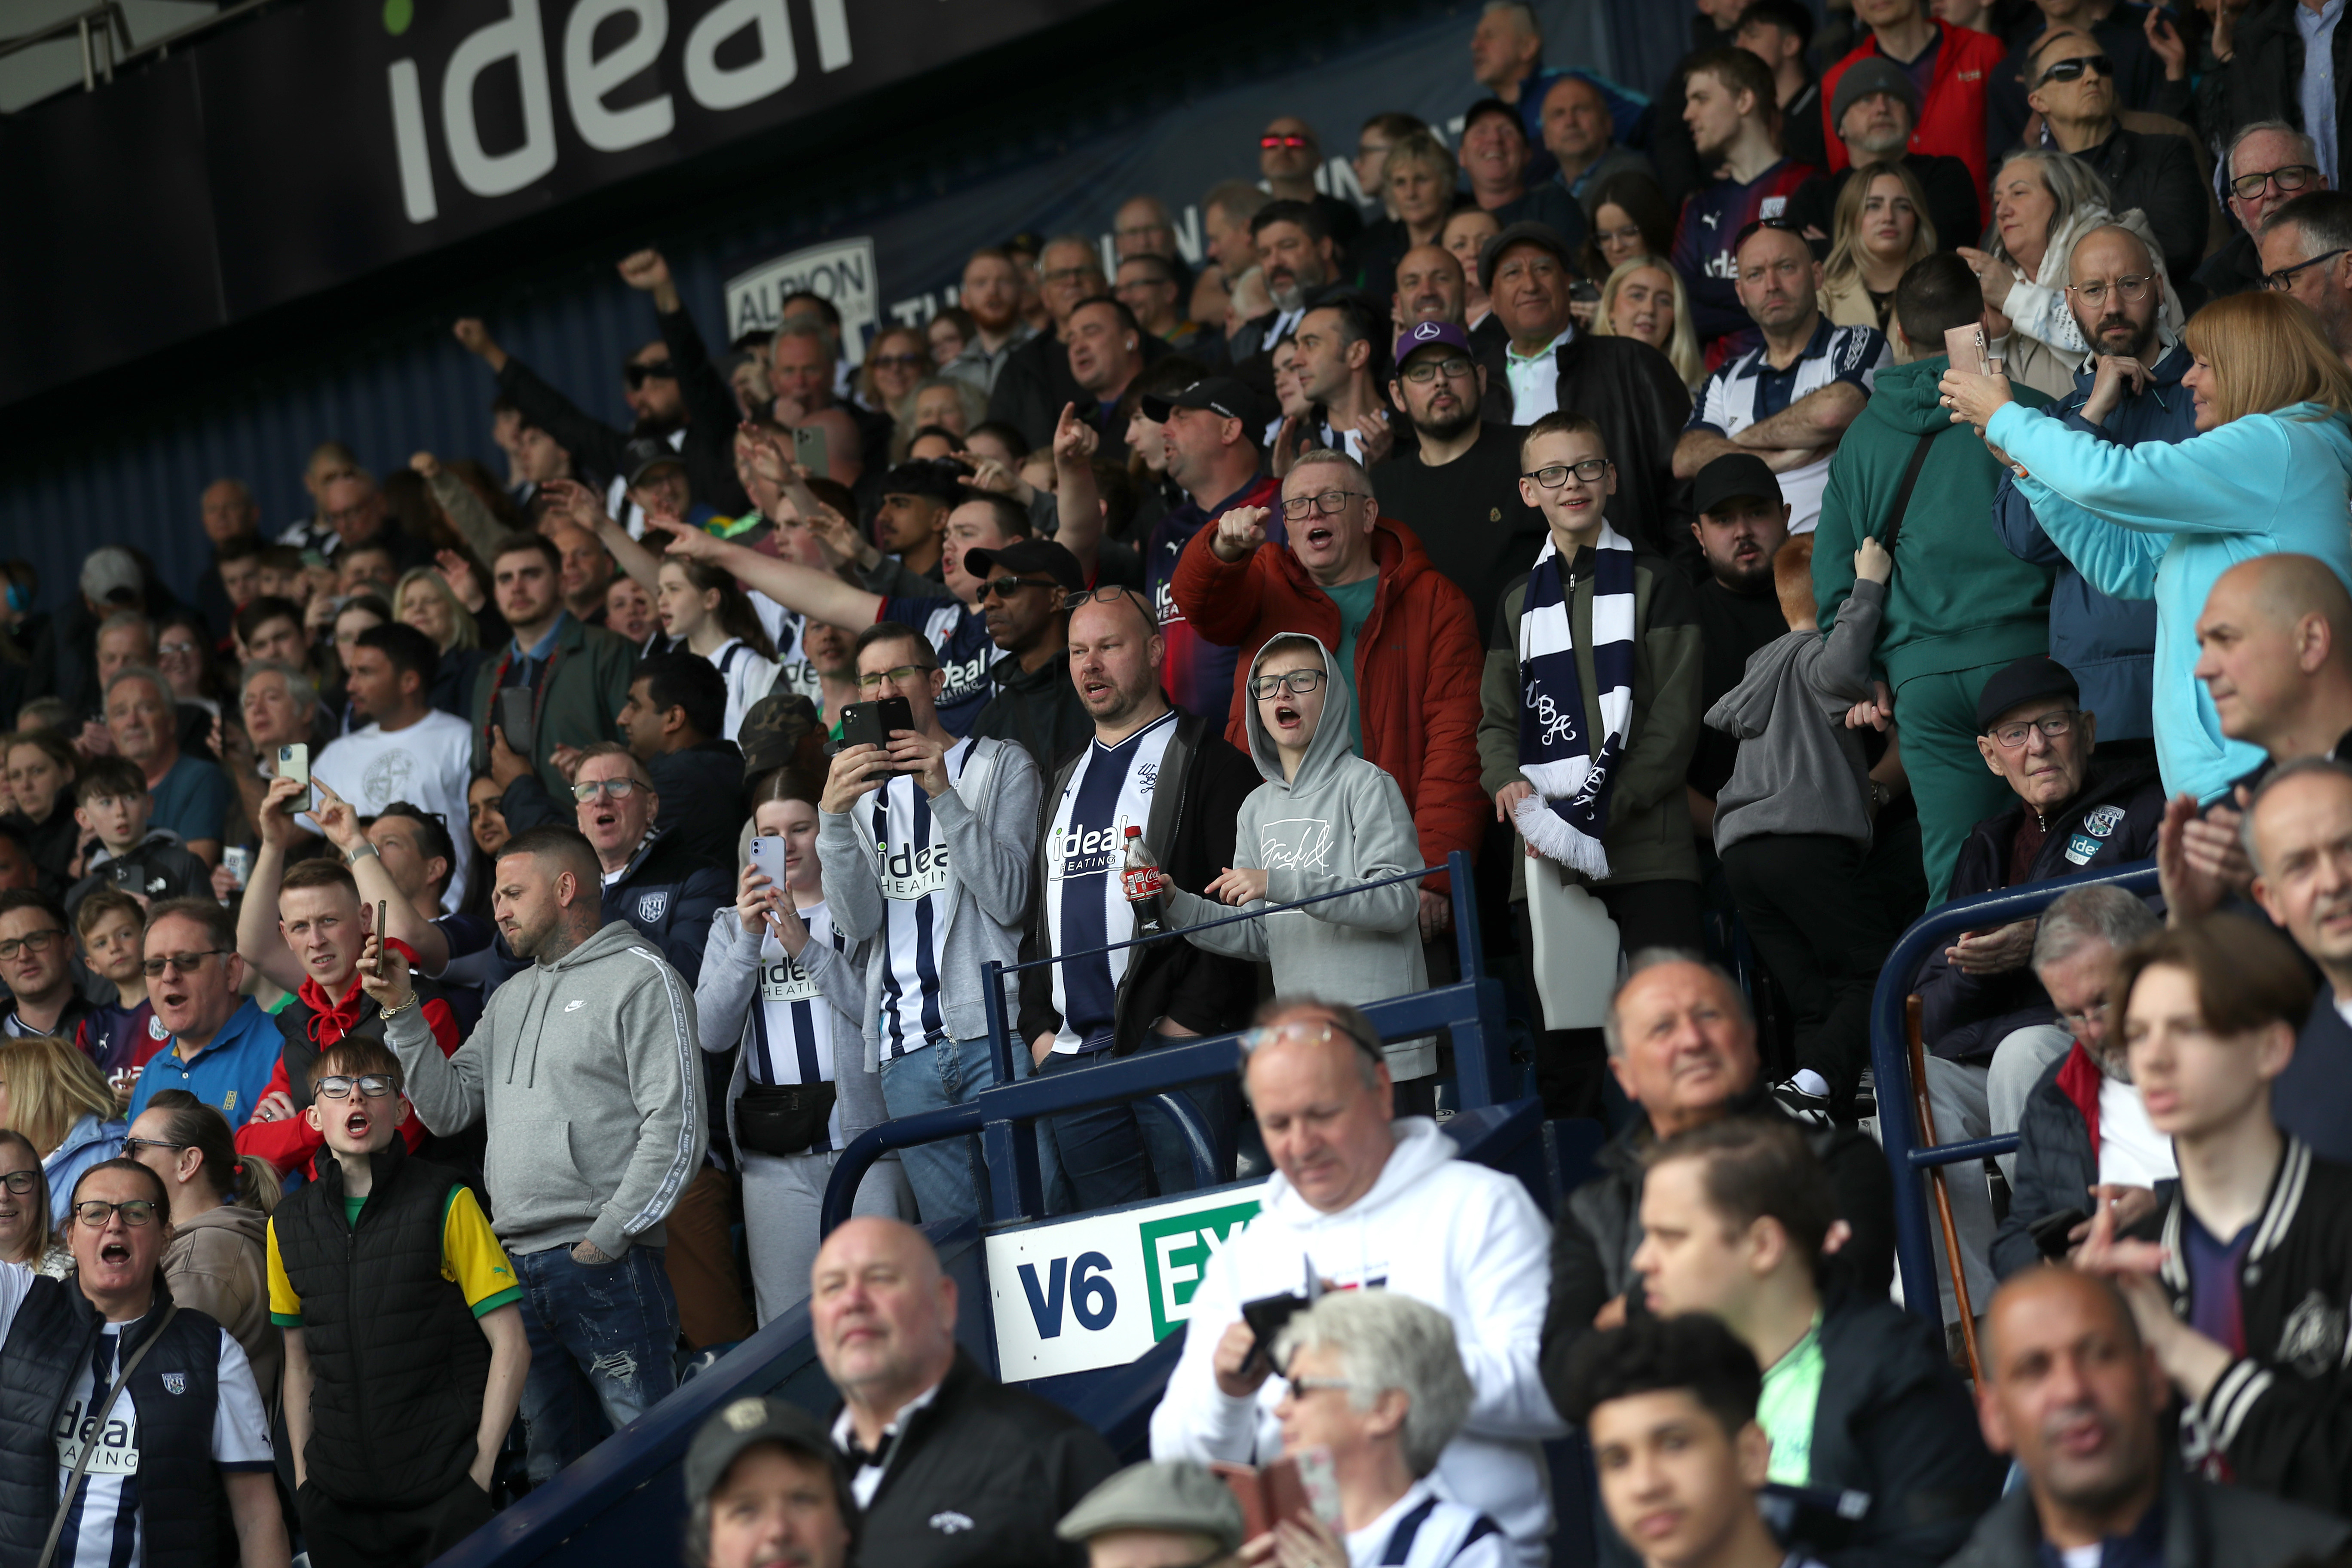 A general view of Albion fans in the West Stand at The Hawthorns